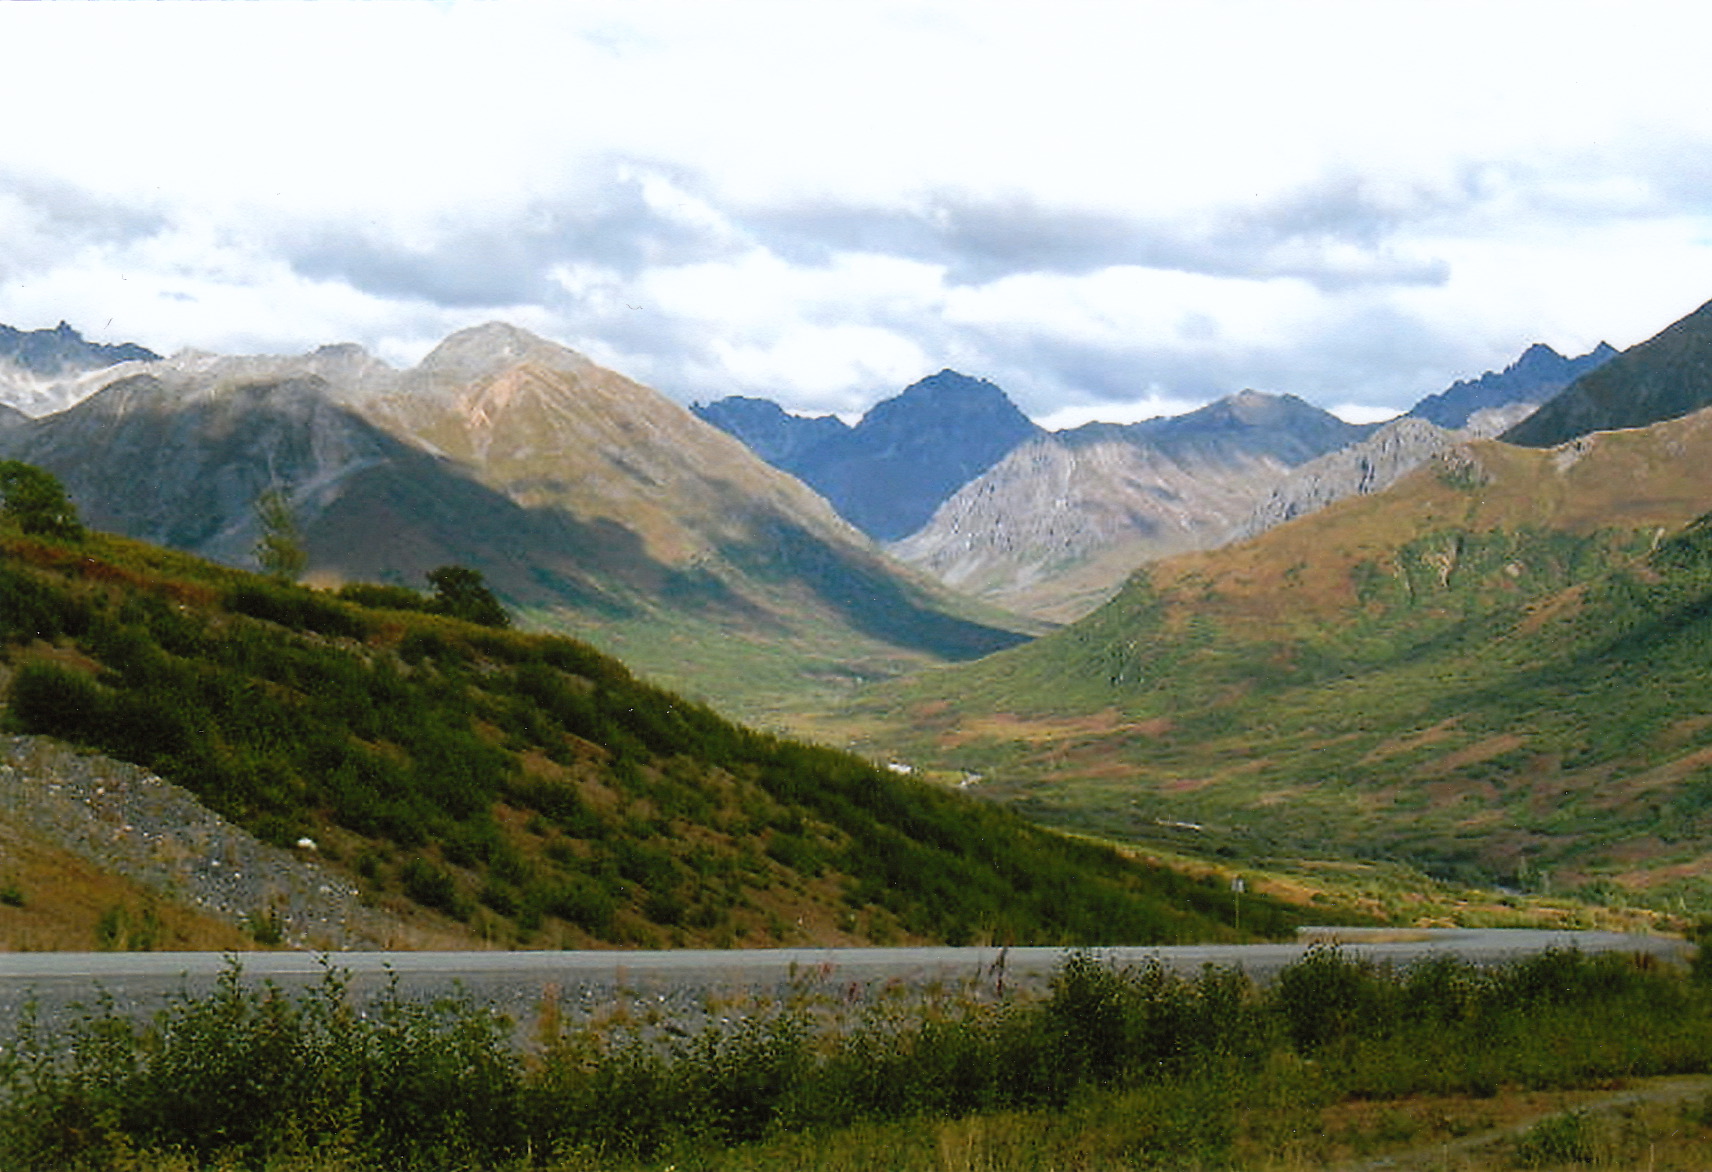 The mountains of Hatcher Pass.